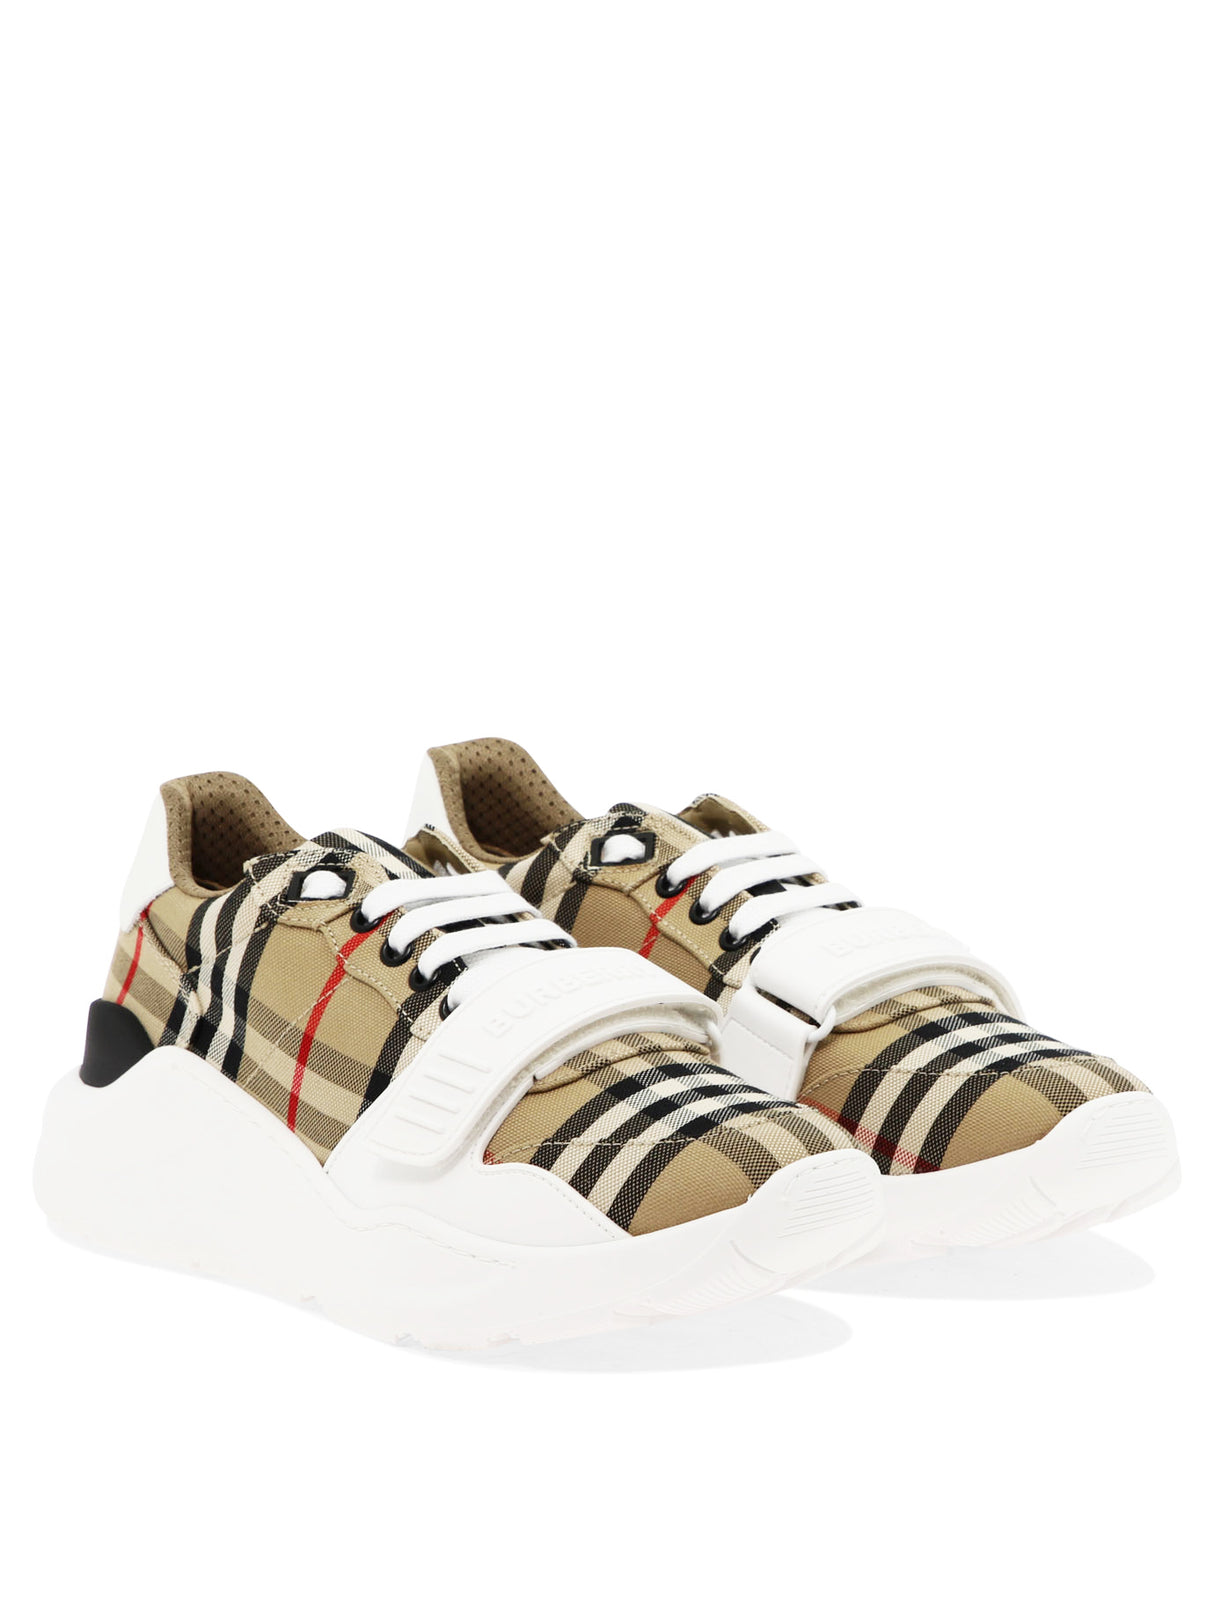 BURBERRY Tan Cotton Leather Sneakers for Women